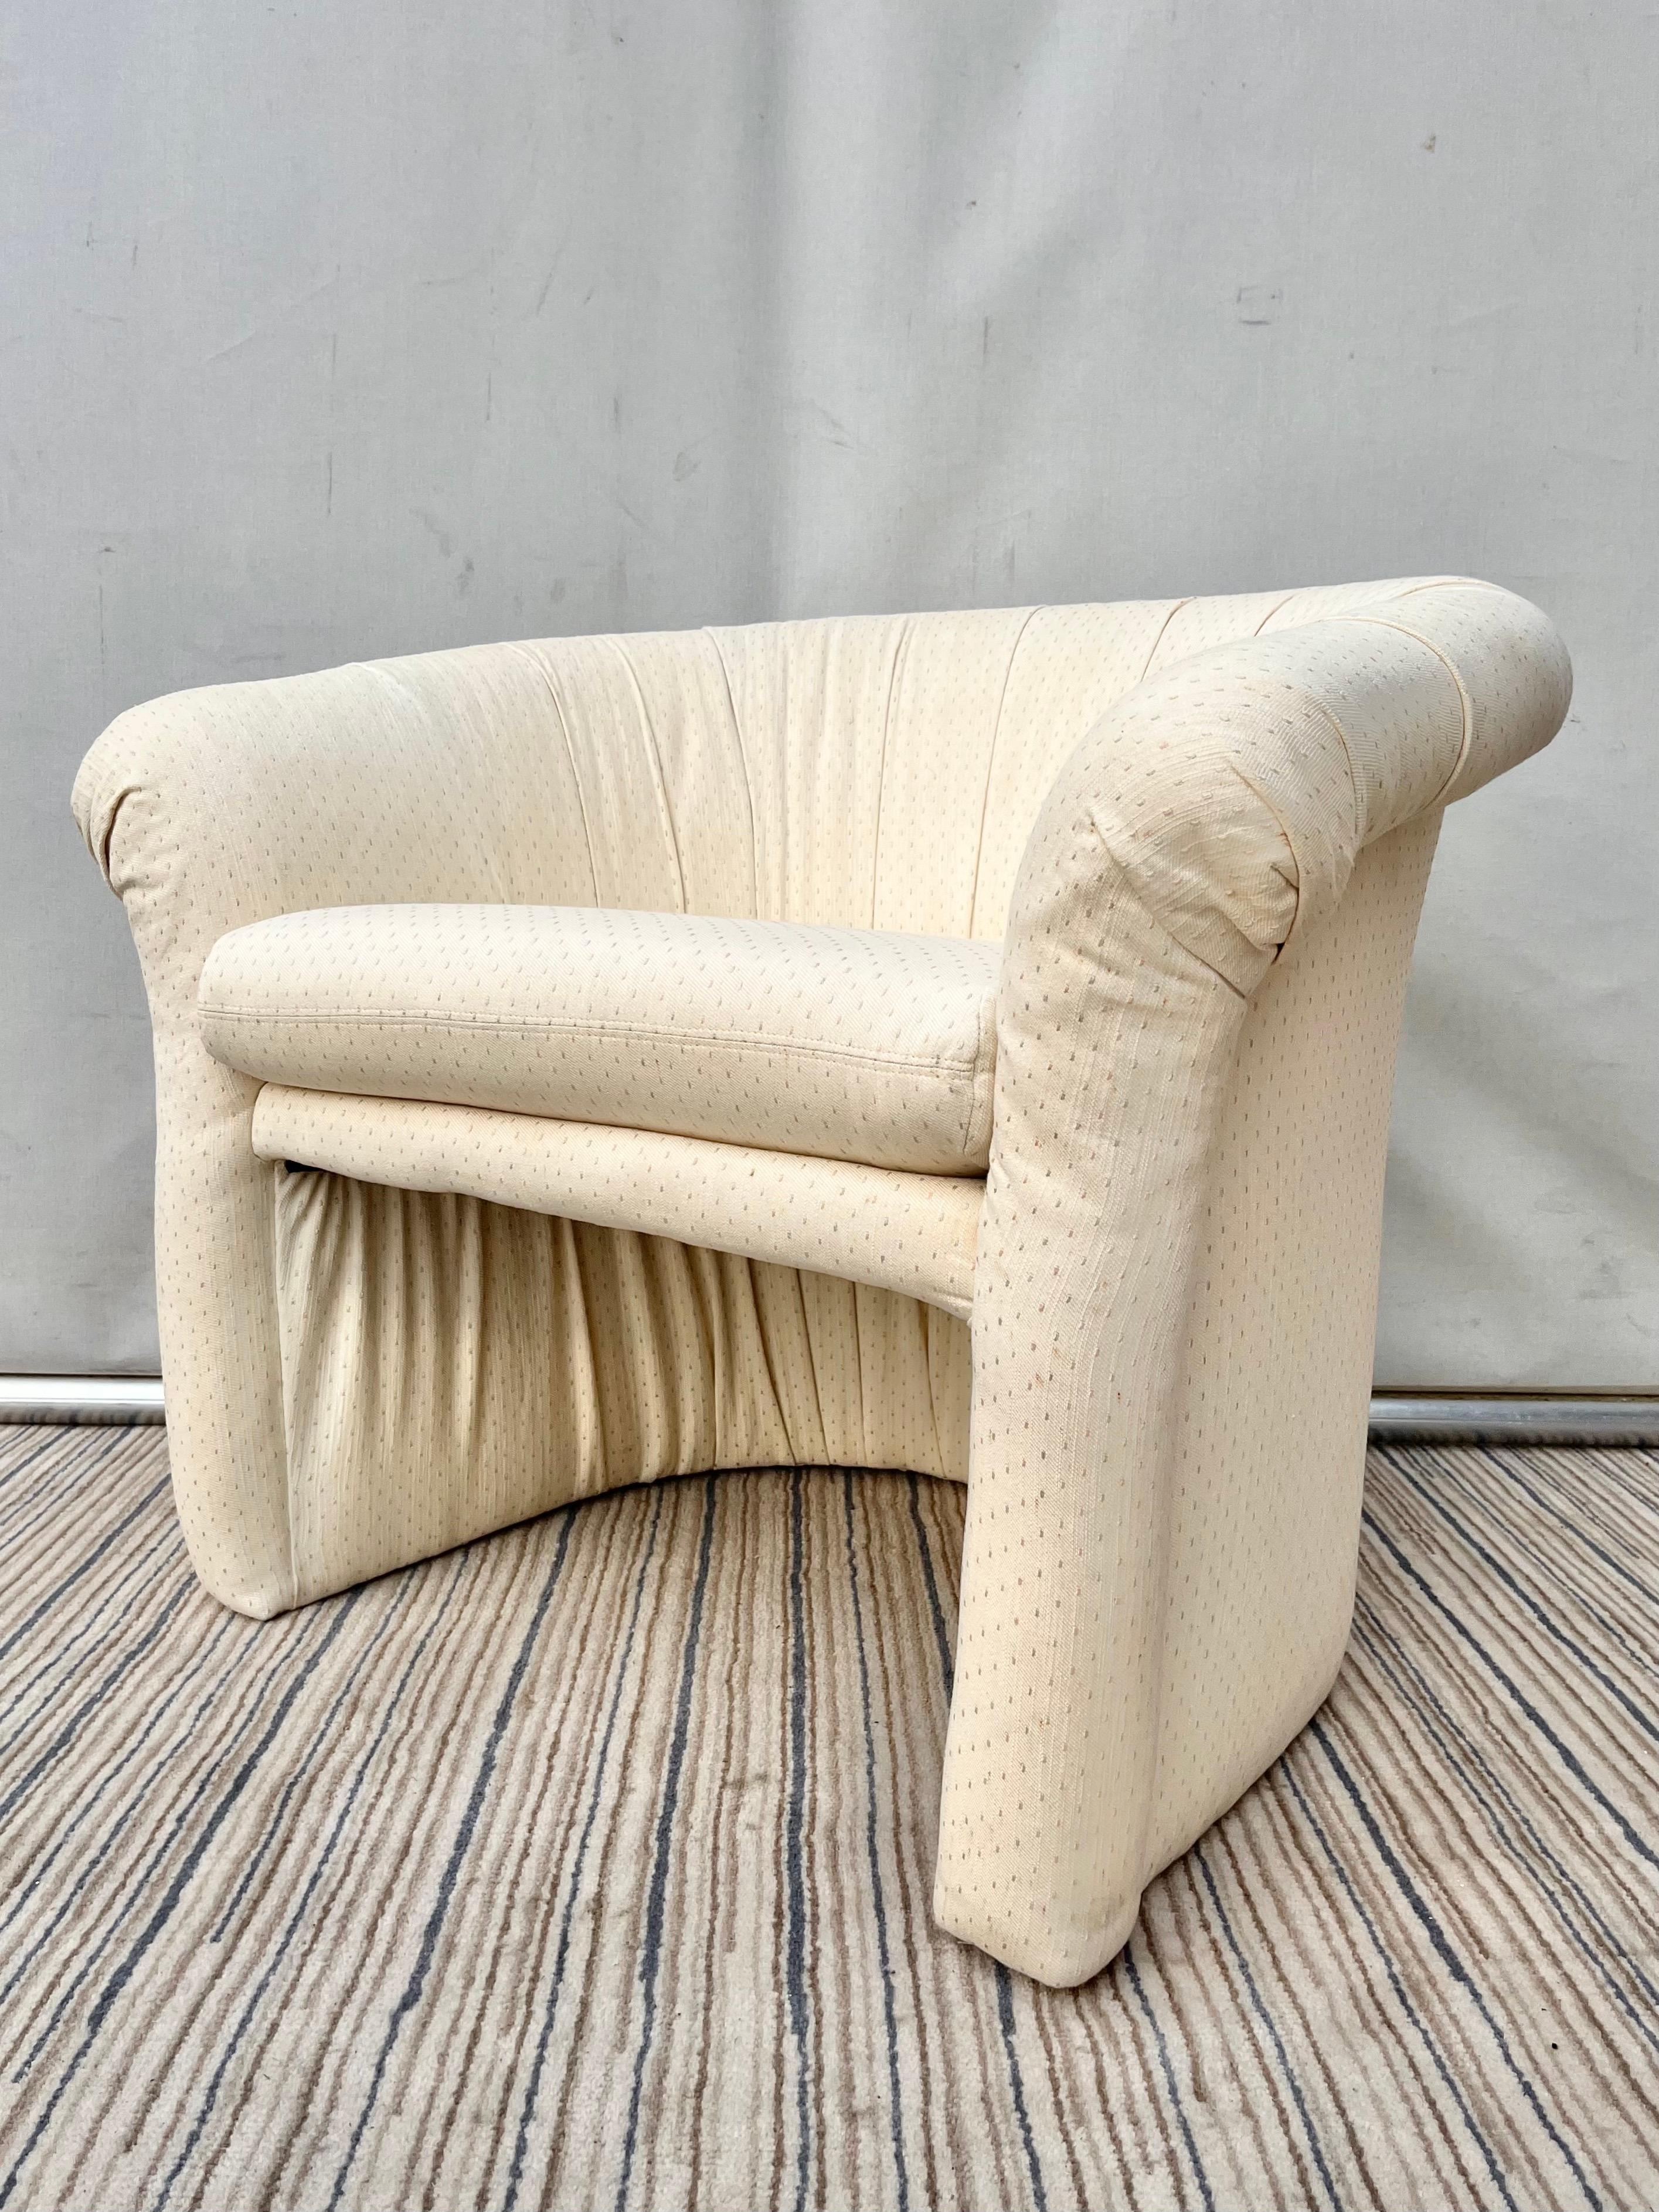 1980s Art Deco Revival Upholstered Lounge Chair with Ottoman by Thayer Coggin For Sale 1